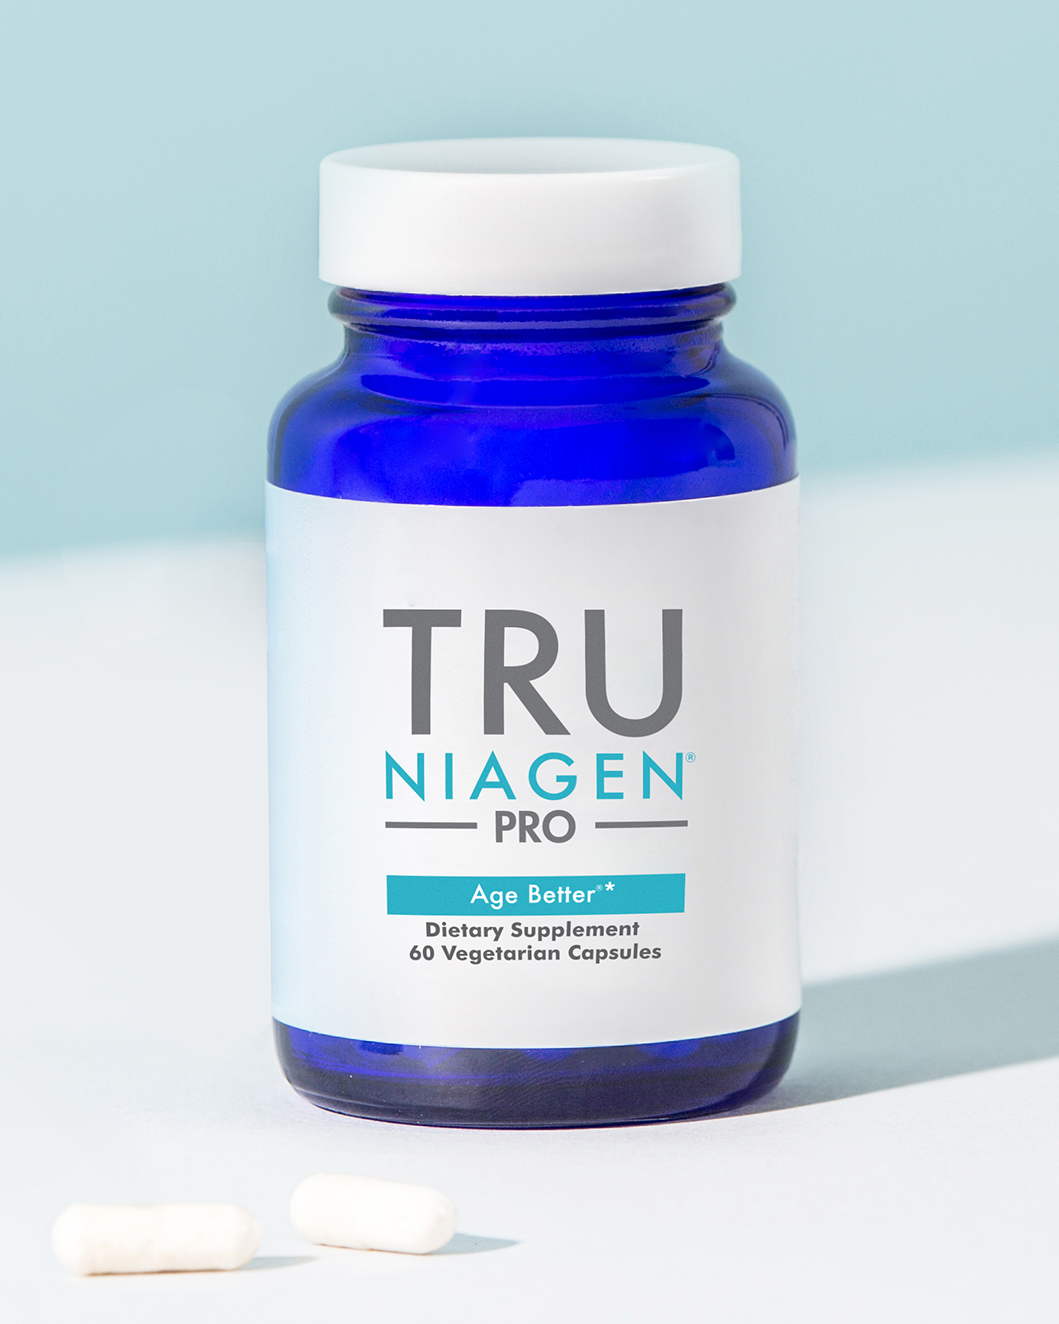 New practitioner supplement stars ChromaDex’s Niagen nicotinamide riboside ingredient for healthy aging